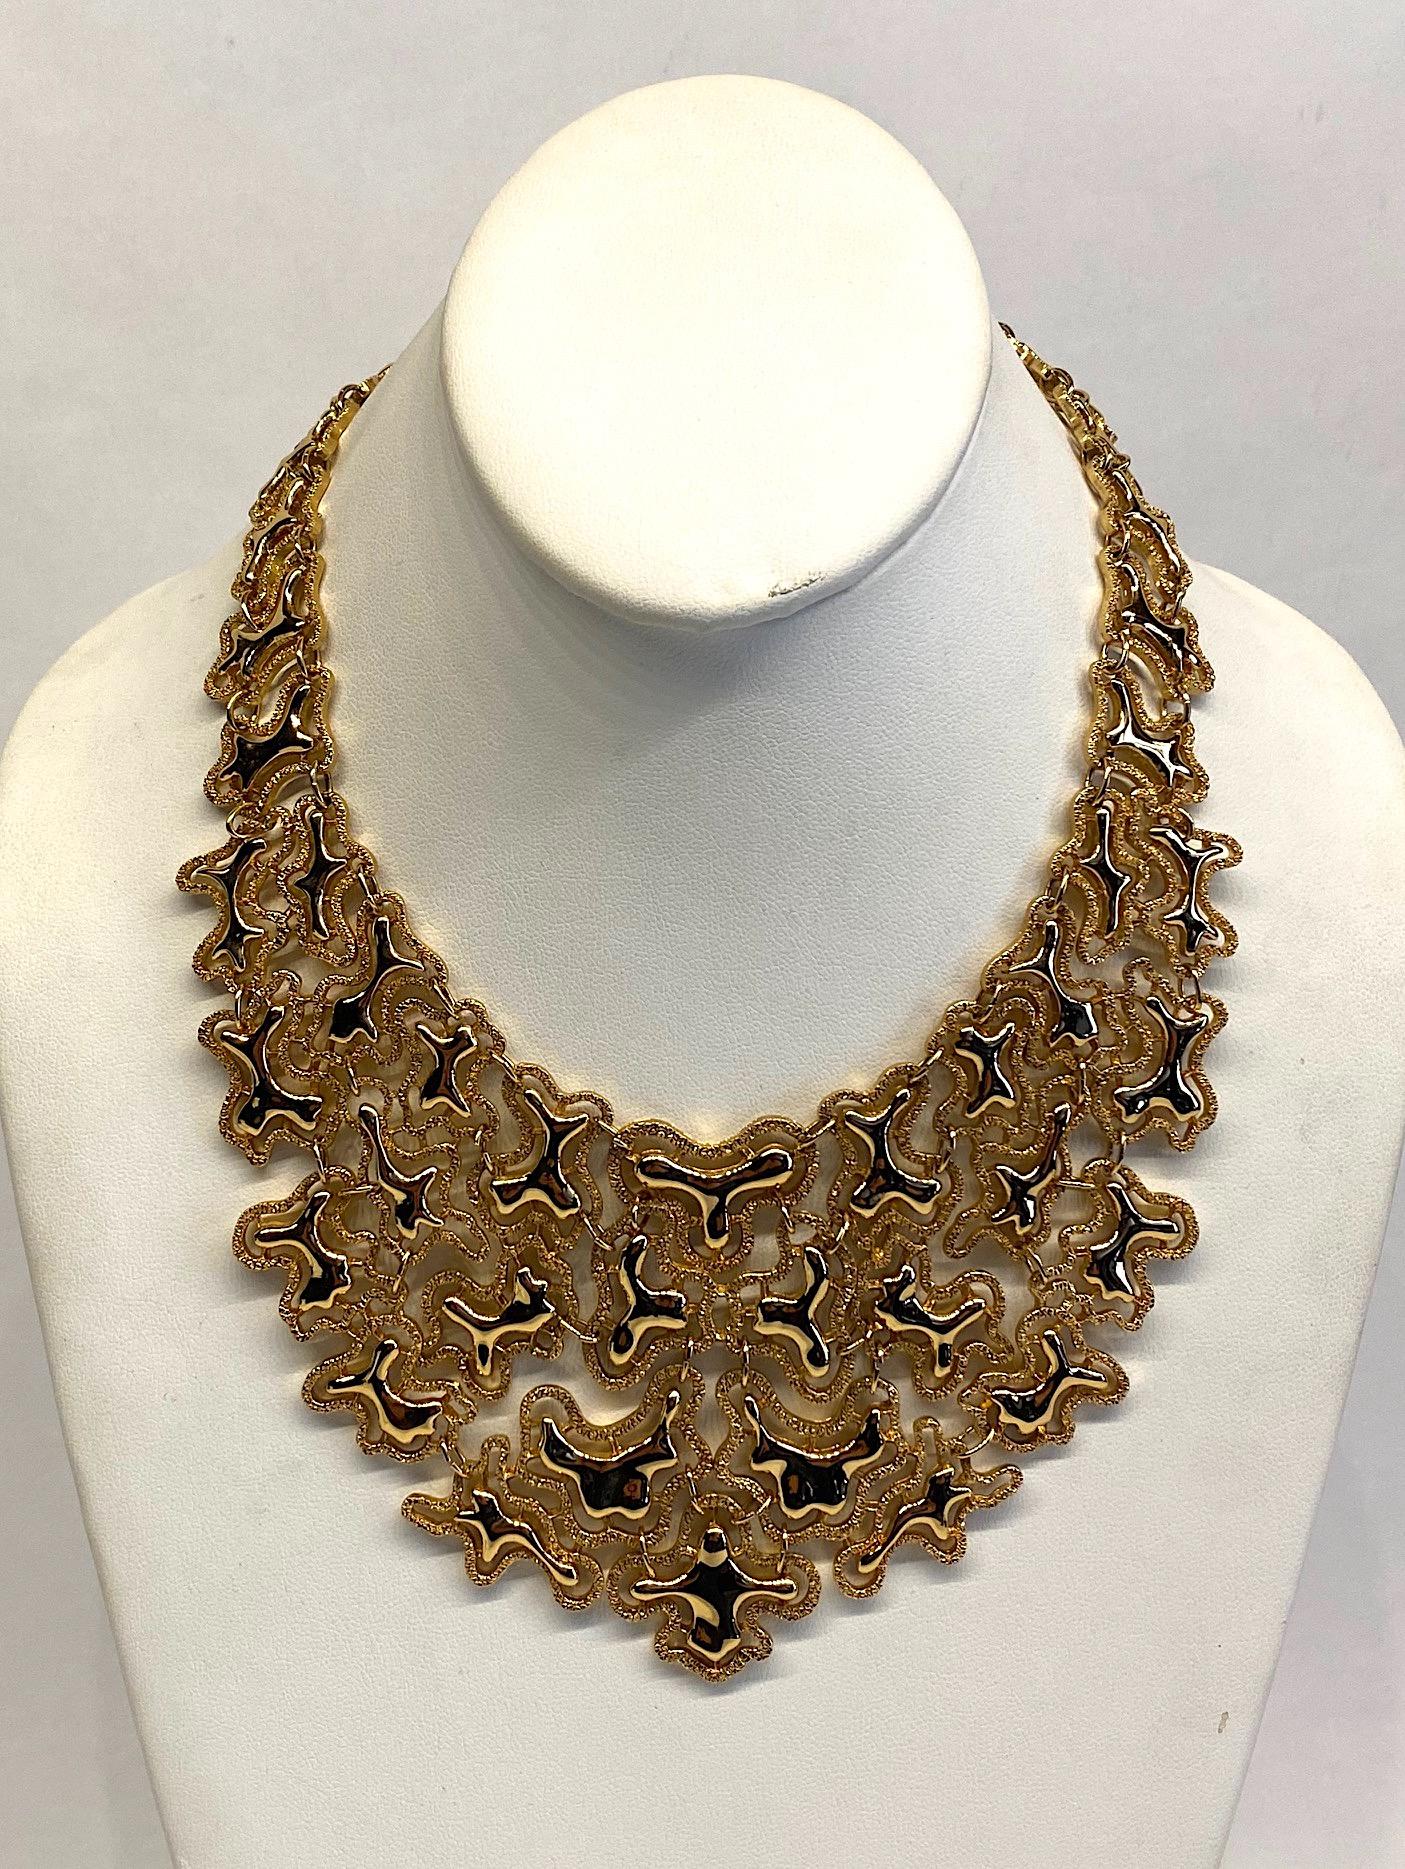 Truly a beautiful and artistic necklace from Monet's 1974 collection called Mandira. The necklace was designed by Elda Krecic. Elda was one of very few women designers in the fashion jewelry business. Previously, she worked for Nettie Rosenstien for